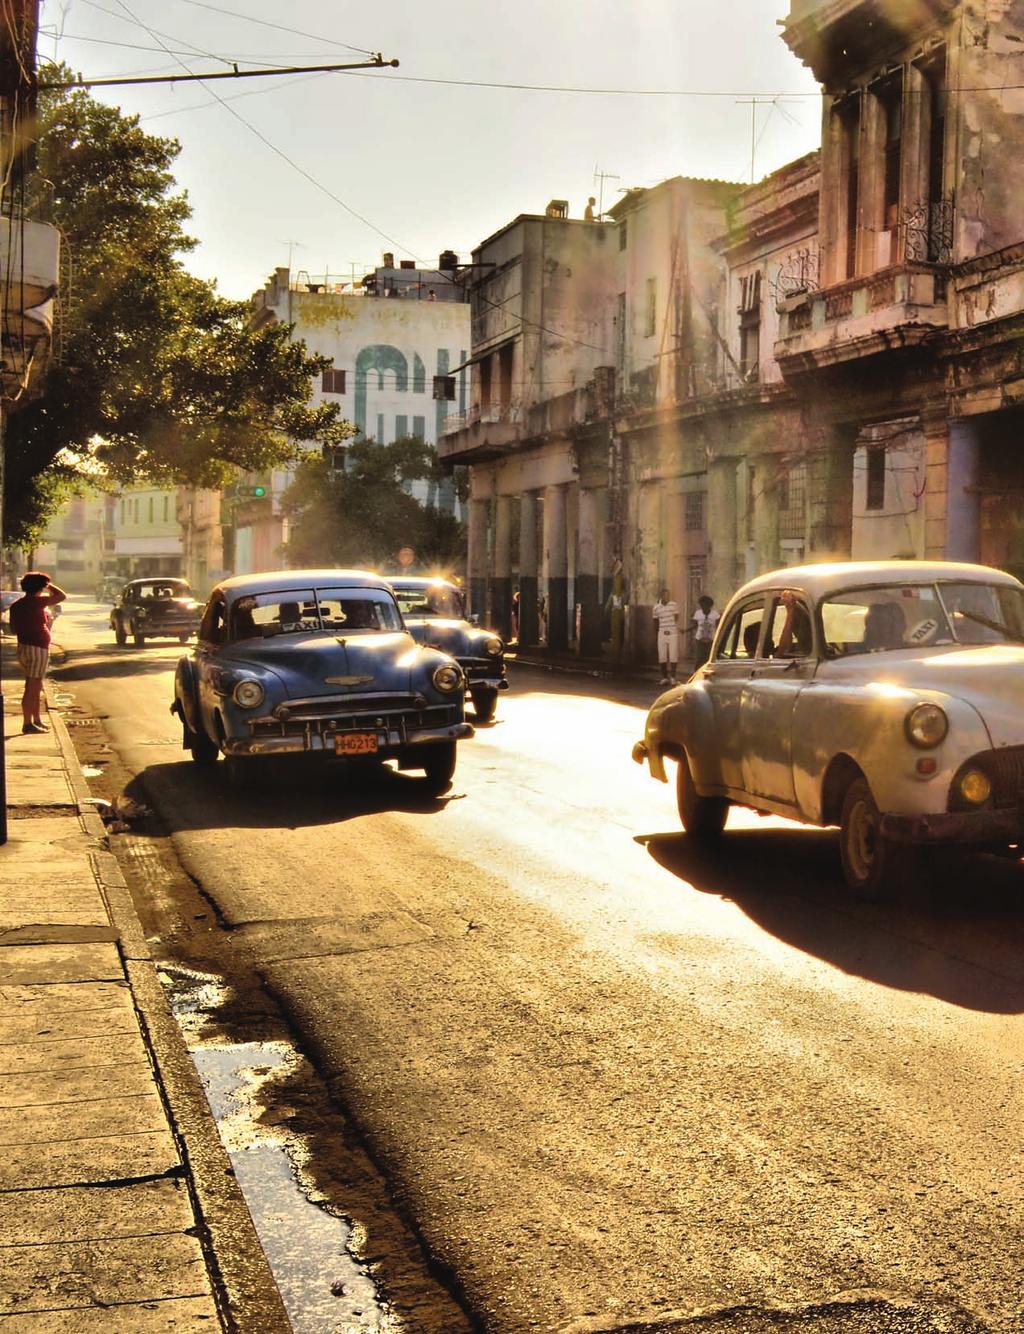 transfer and receive funds directly from Cuba, a move that allows U.S.